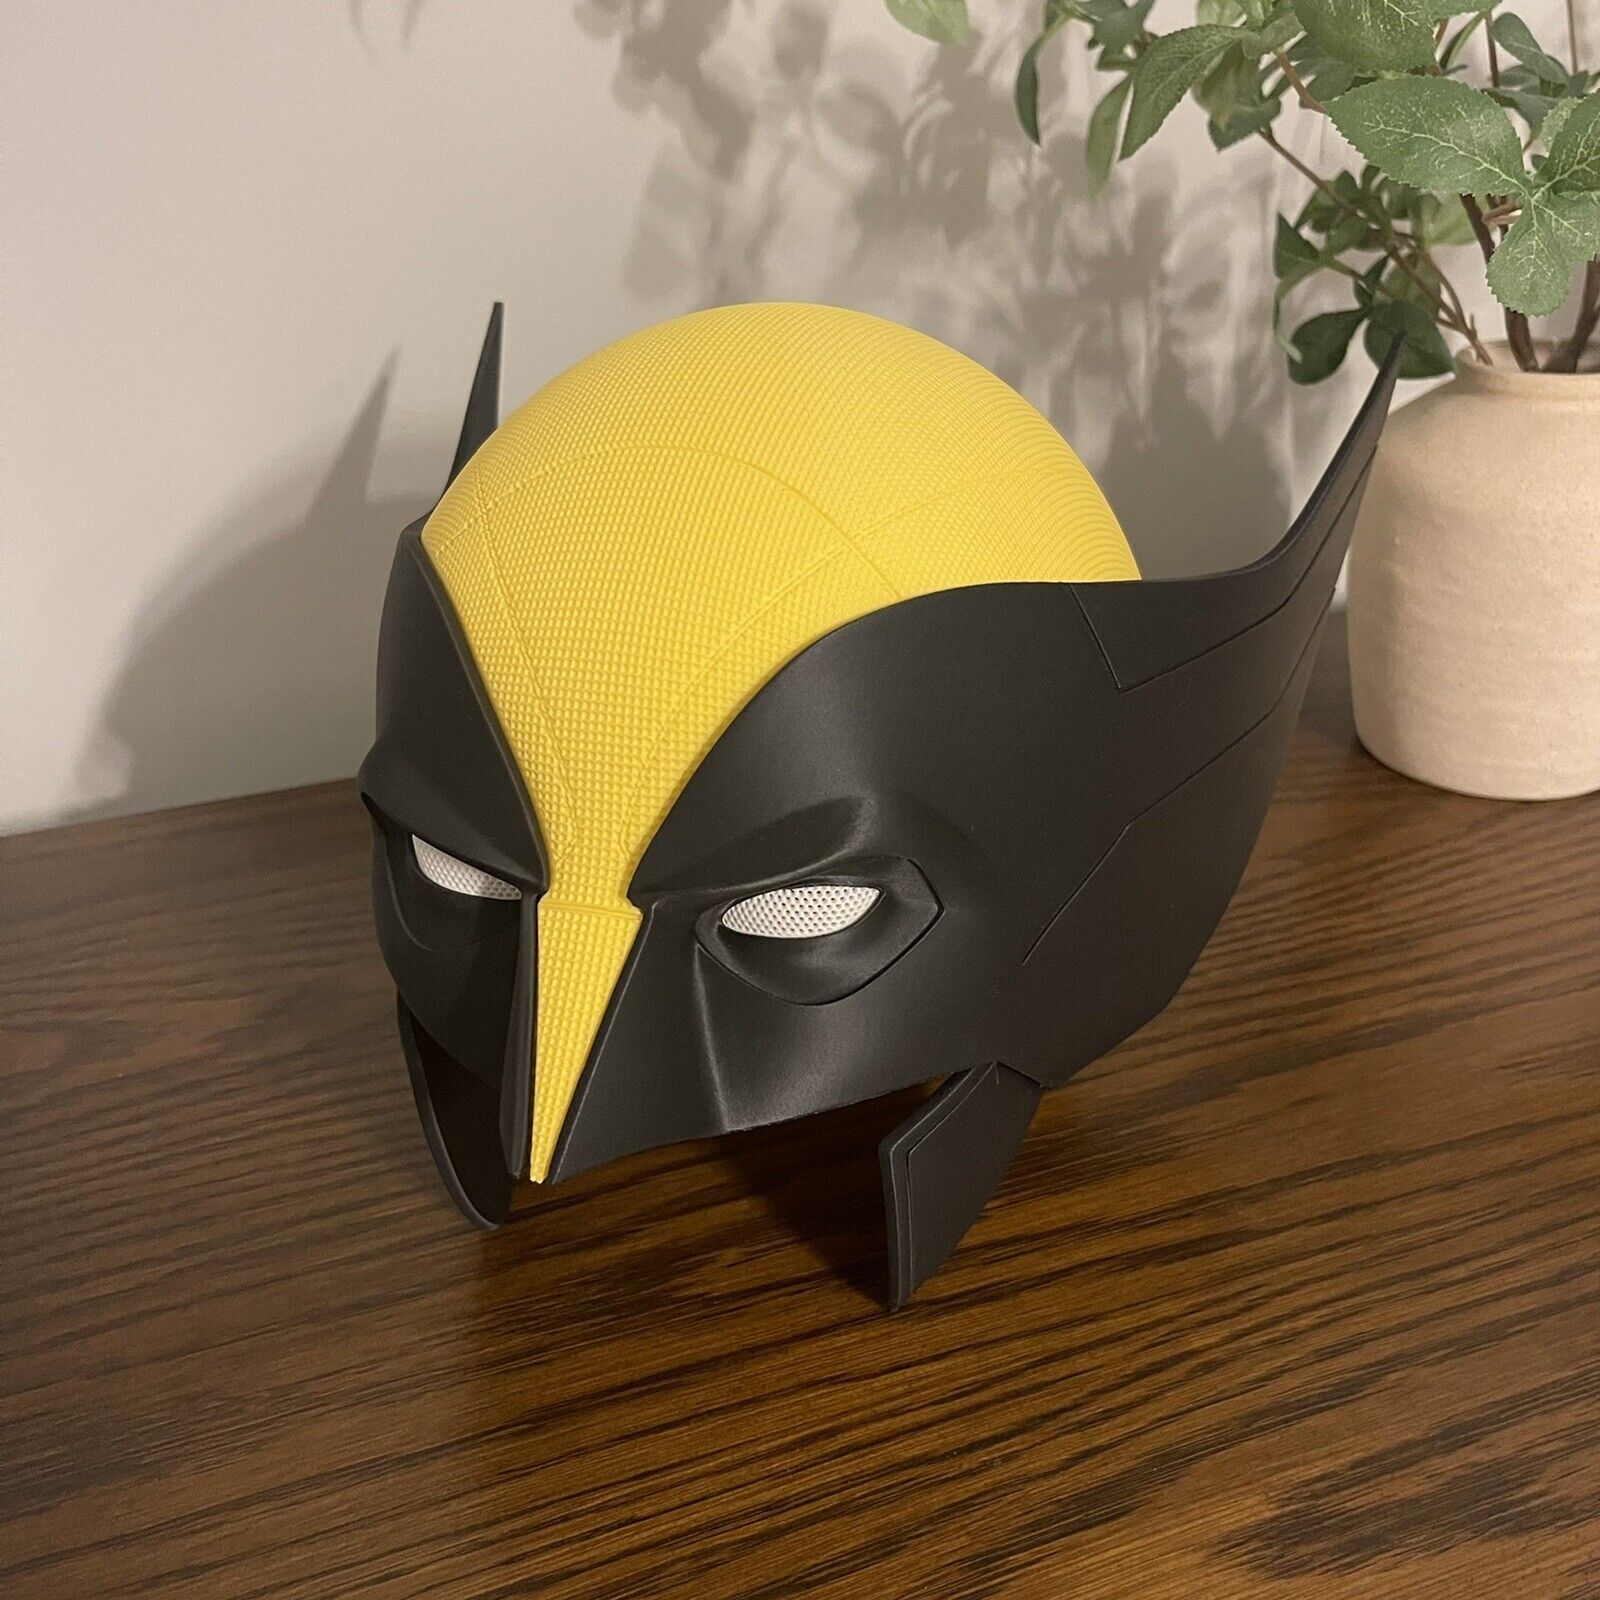 Wolverine Inspired Dp3 3d Printed Mask, 